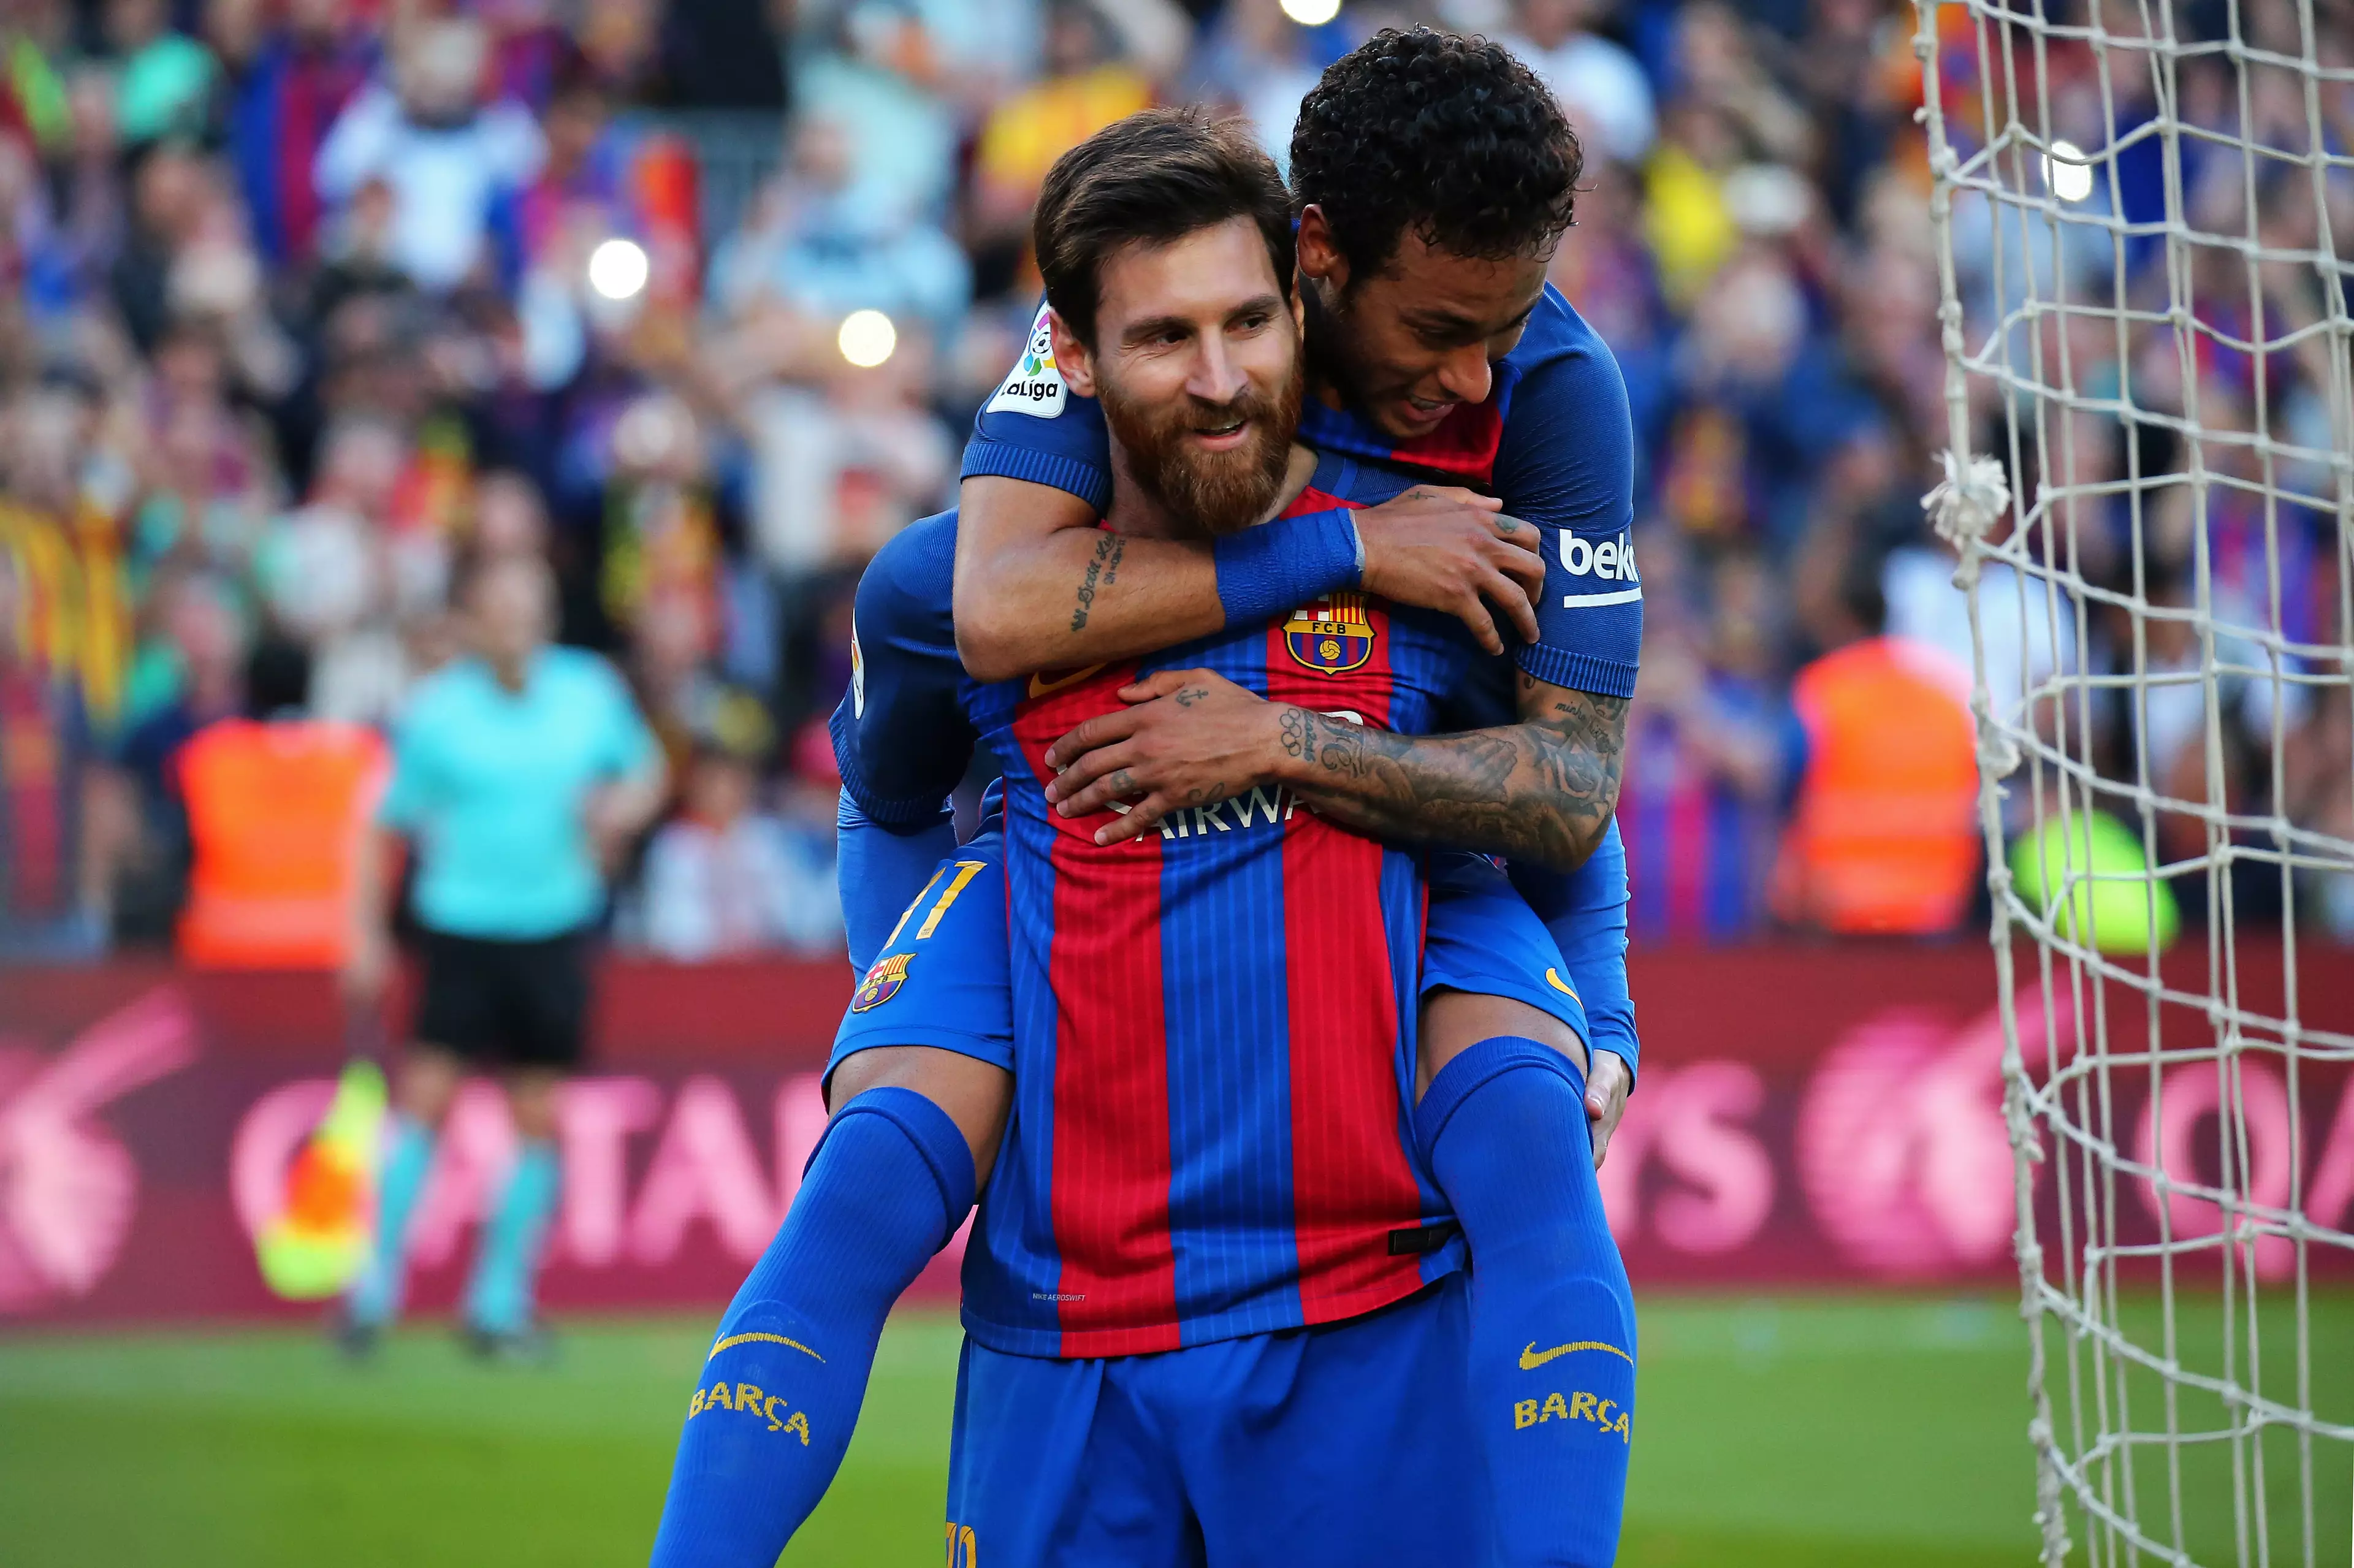 For Every Goal Lionel Messi and Neymar Score At The World Cup, 10,000 Meals Will Be Donated